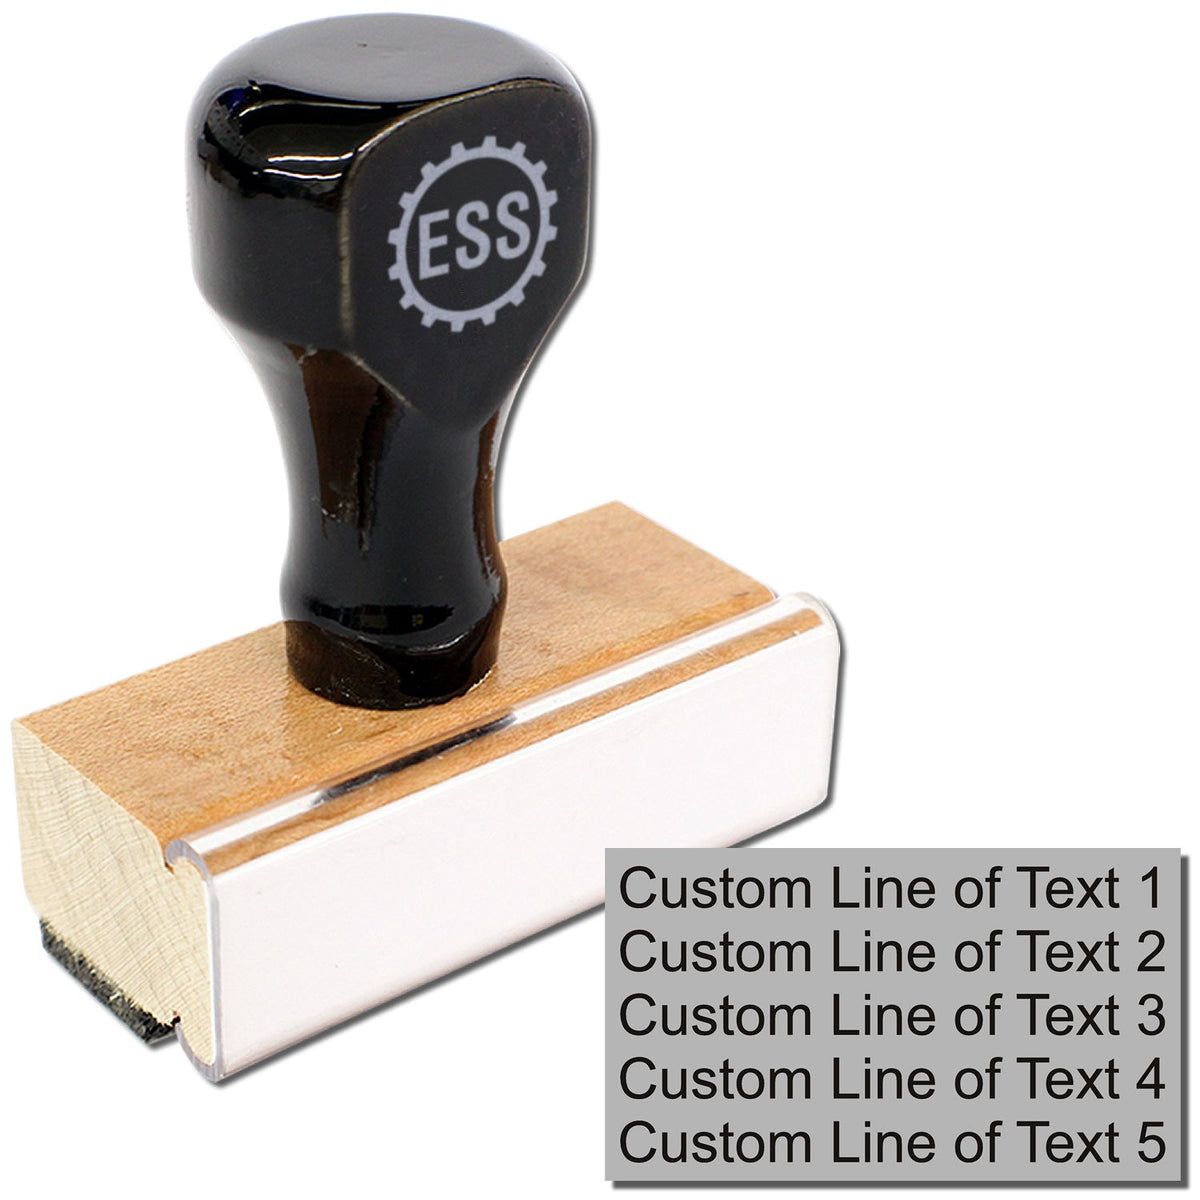 5 Line Custom Rubber Stamp with Wood Handle